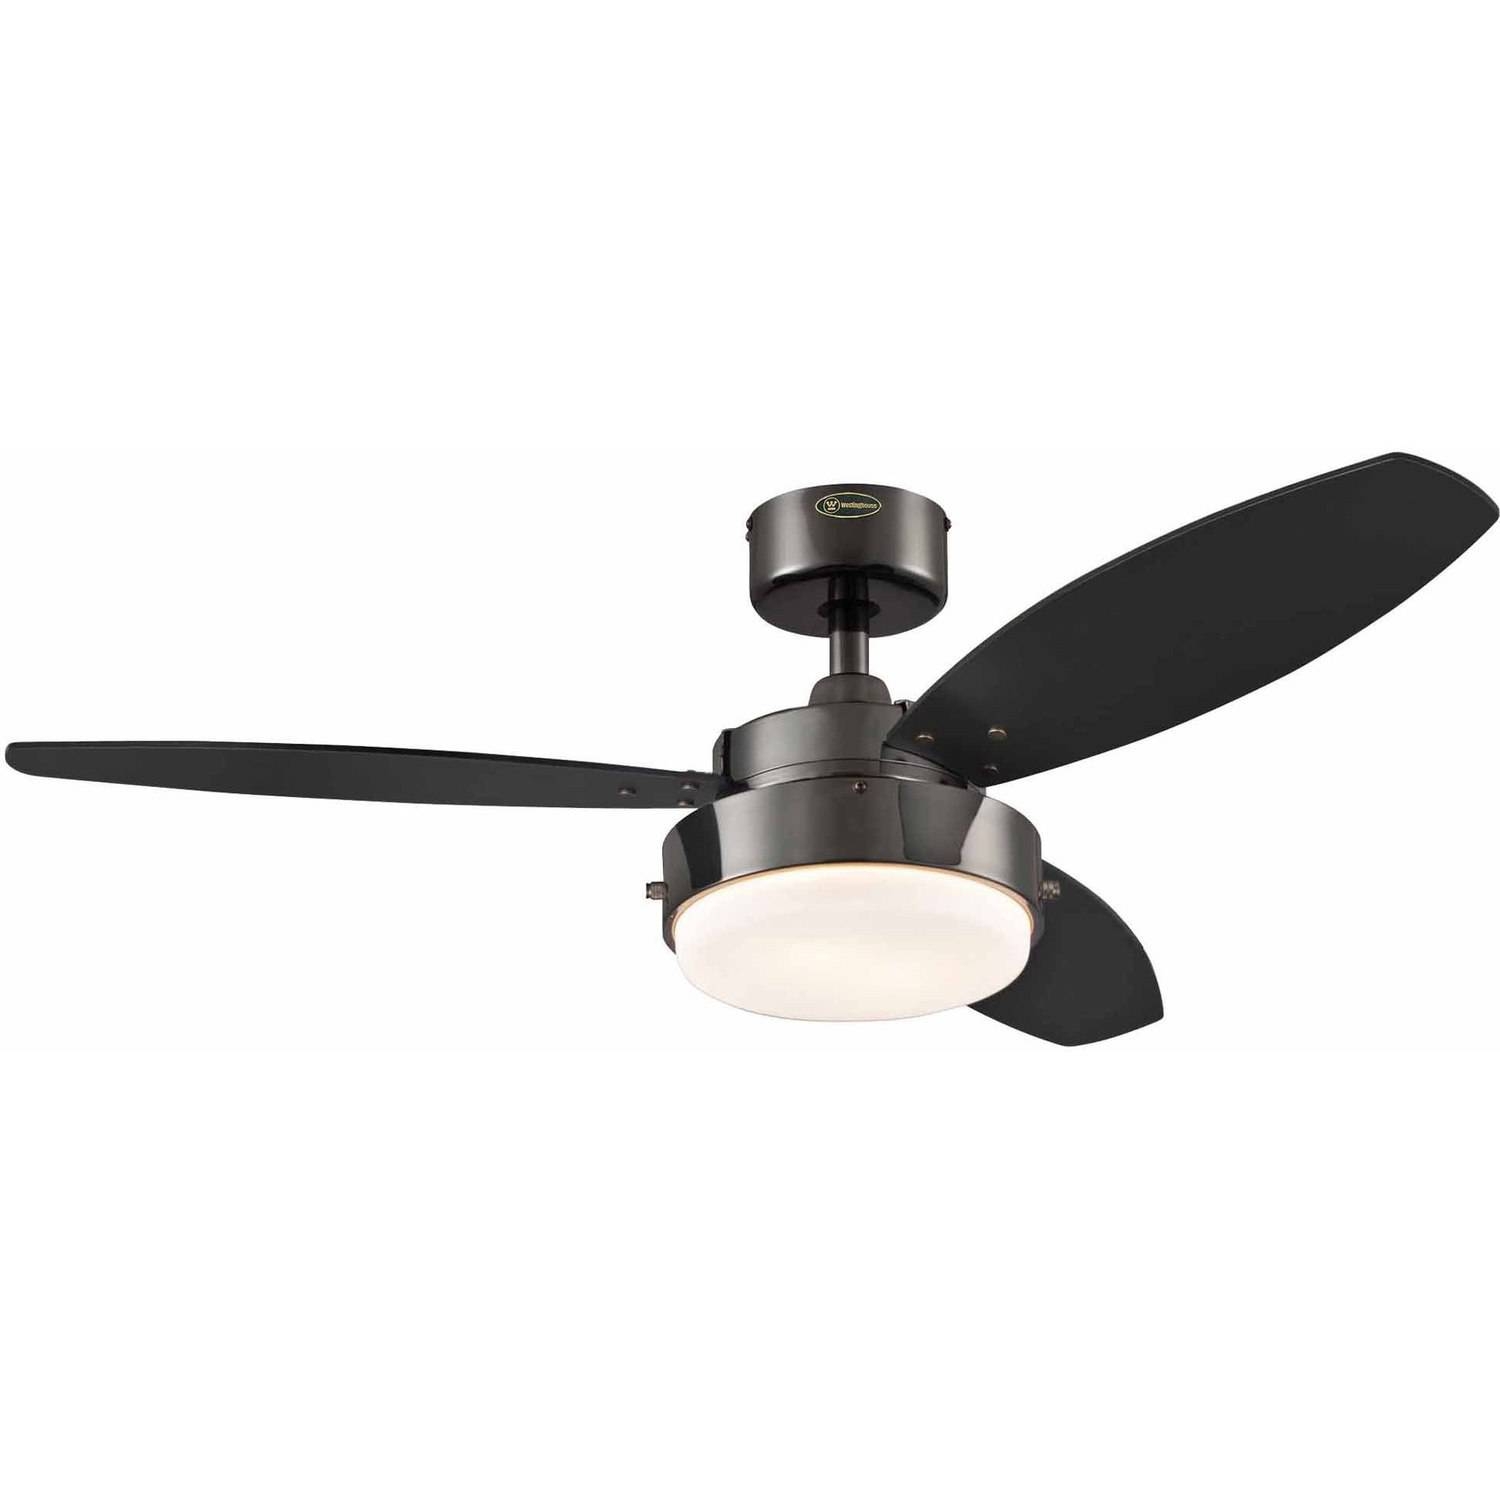 42 Ceiling Fan With Light And Remote